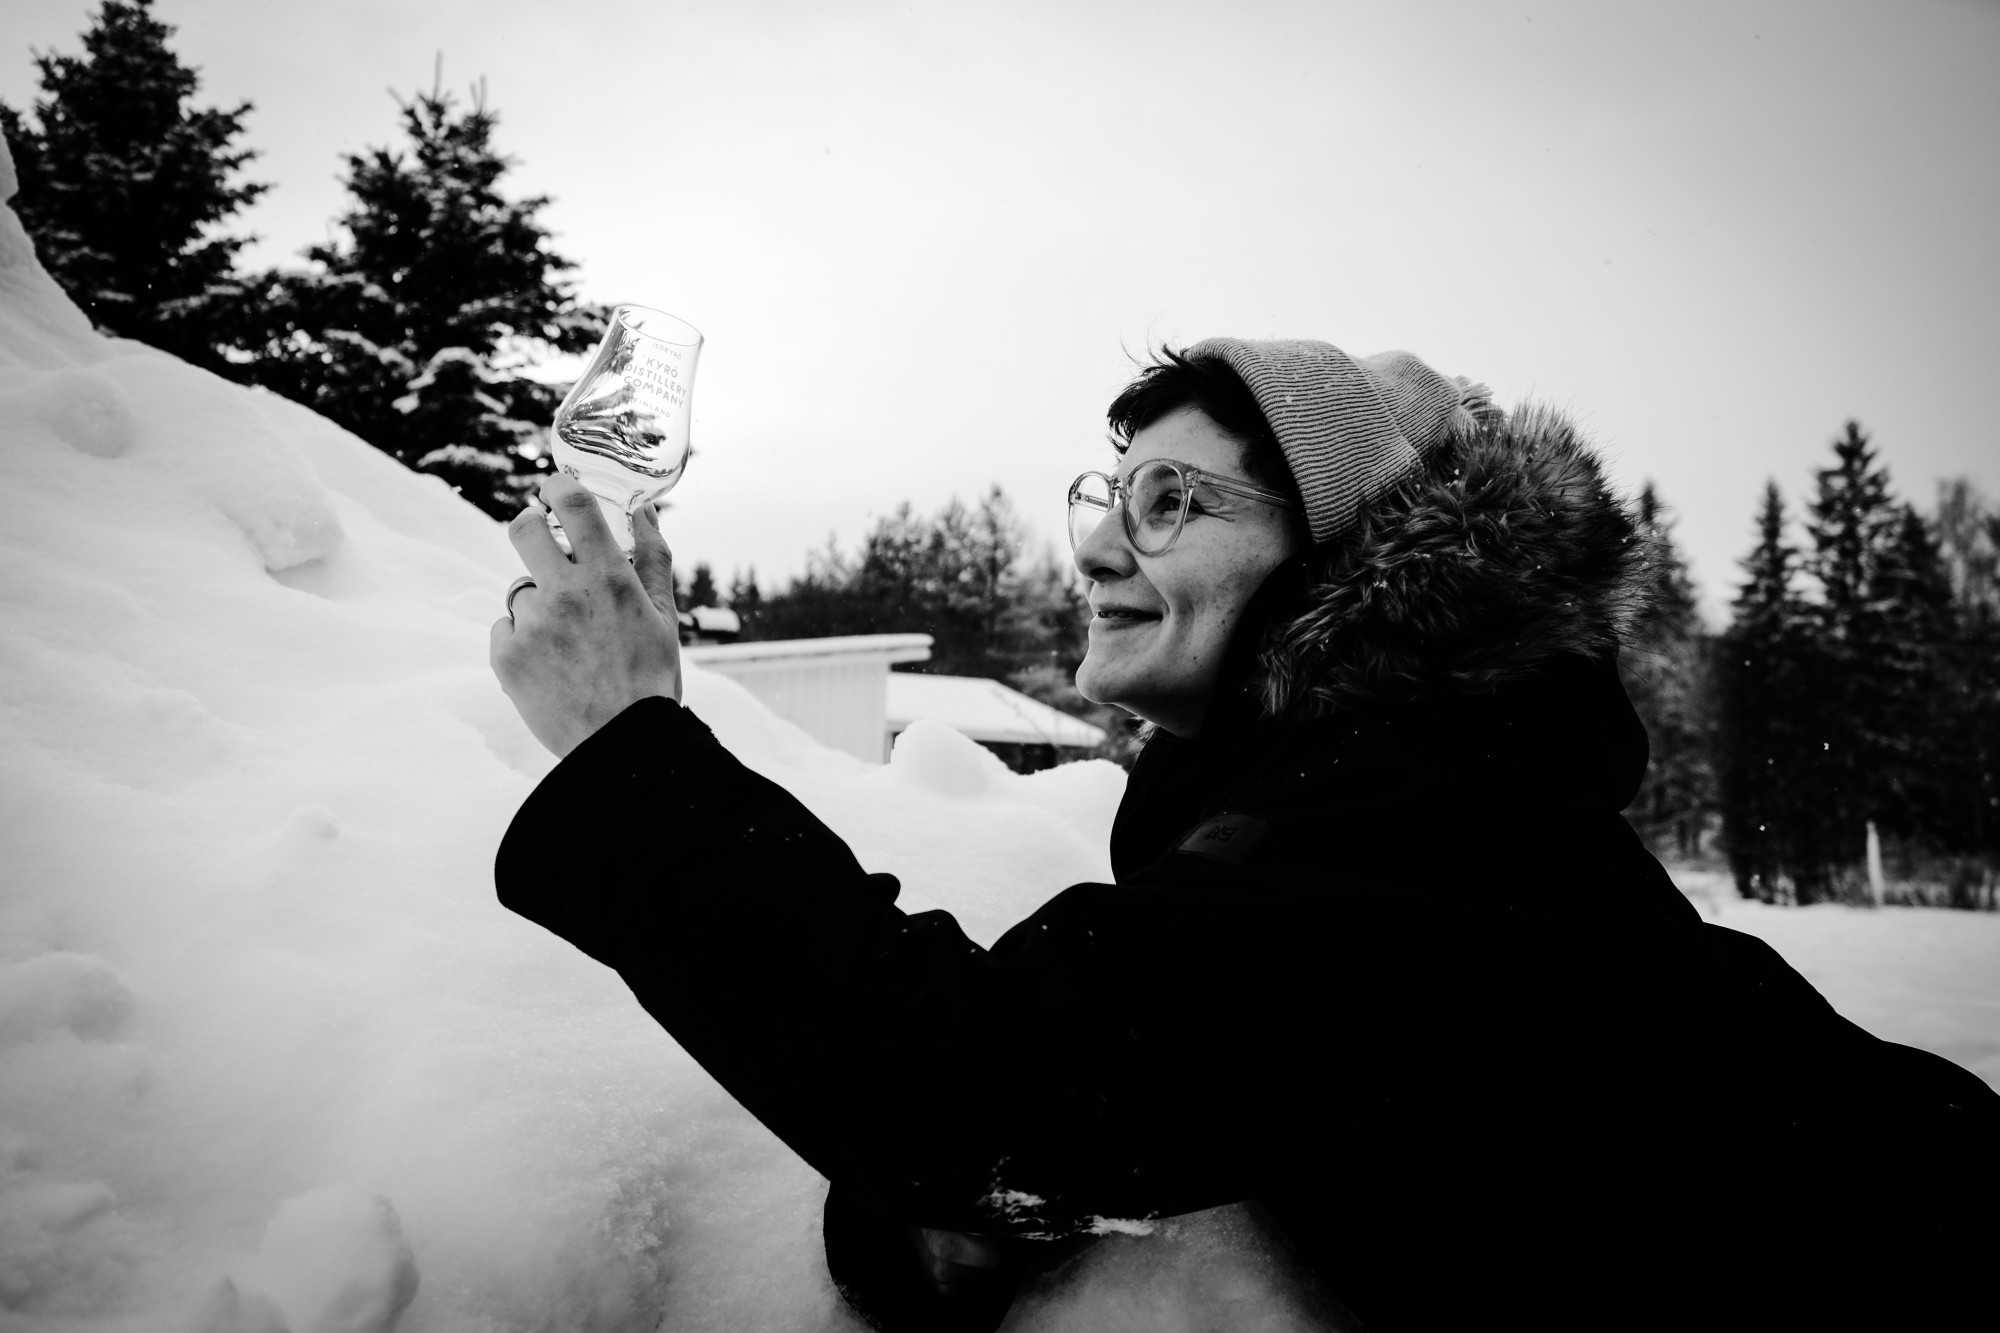 Young woman staring at an empty Glencairn tasting glass. She is outside surrounded by snow.